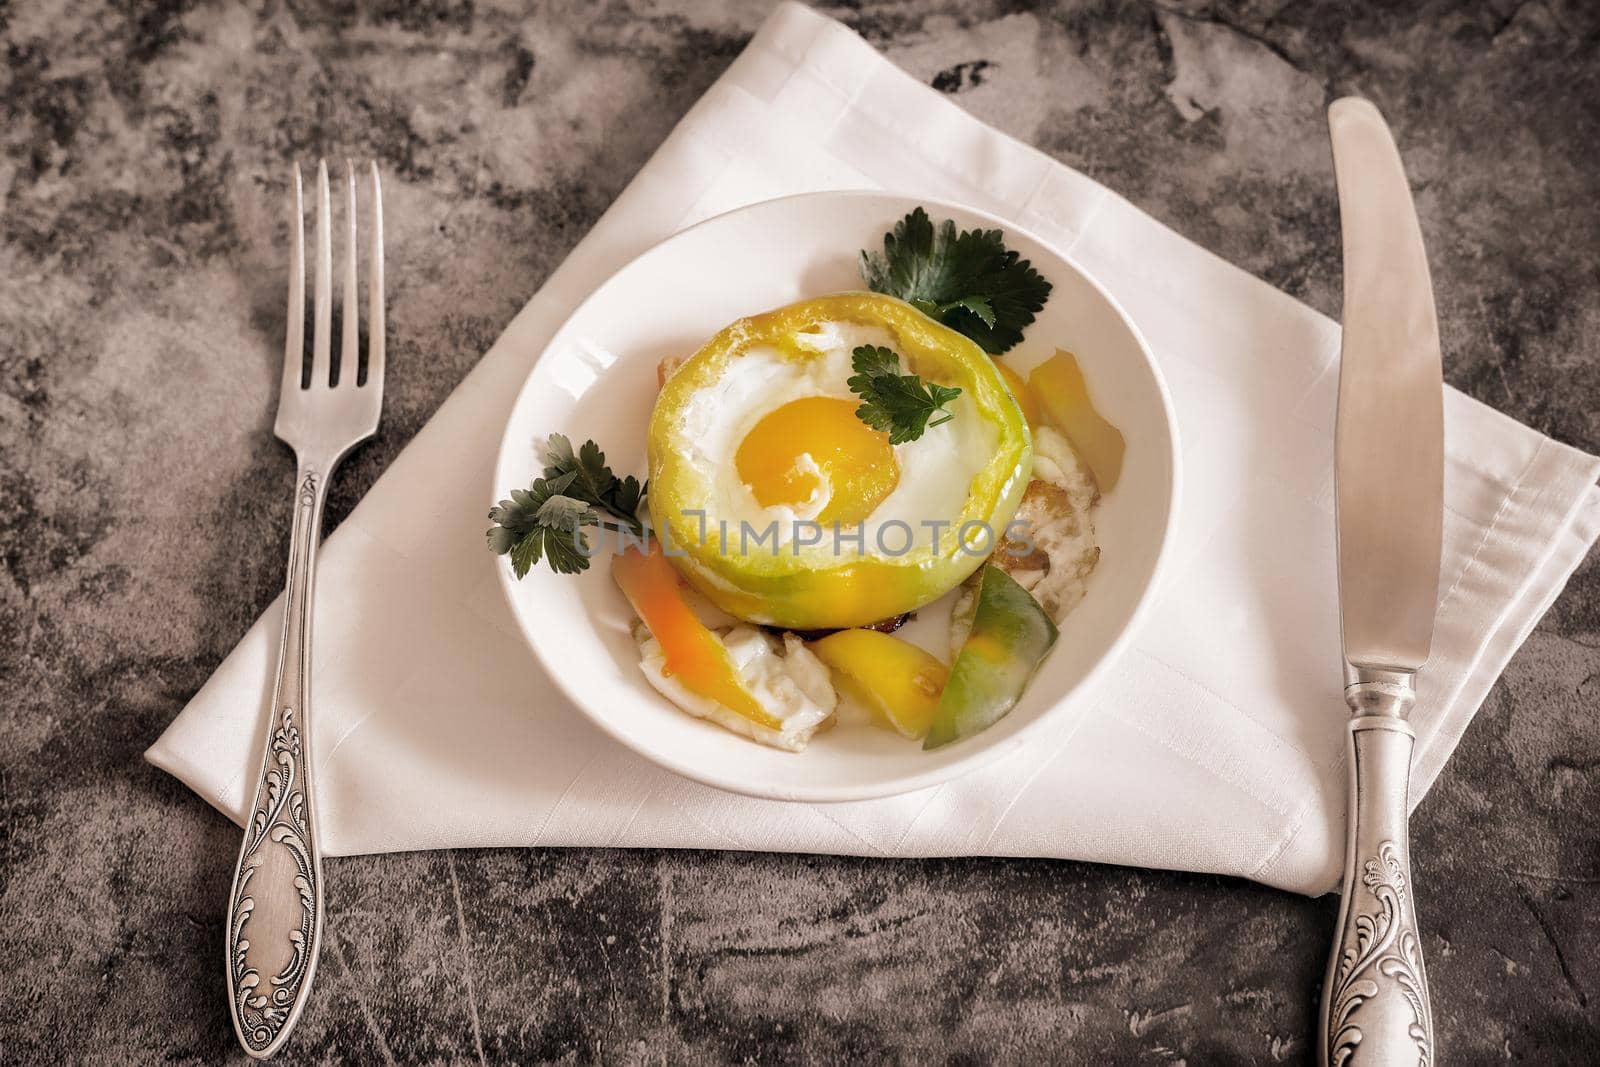 On the table on a plate is an oven-baked bell pepper with an egg inside the pepper. There are Cutlery on a napkin nearby. Top view with space to copy. Flat lay